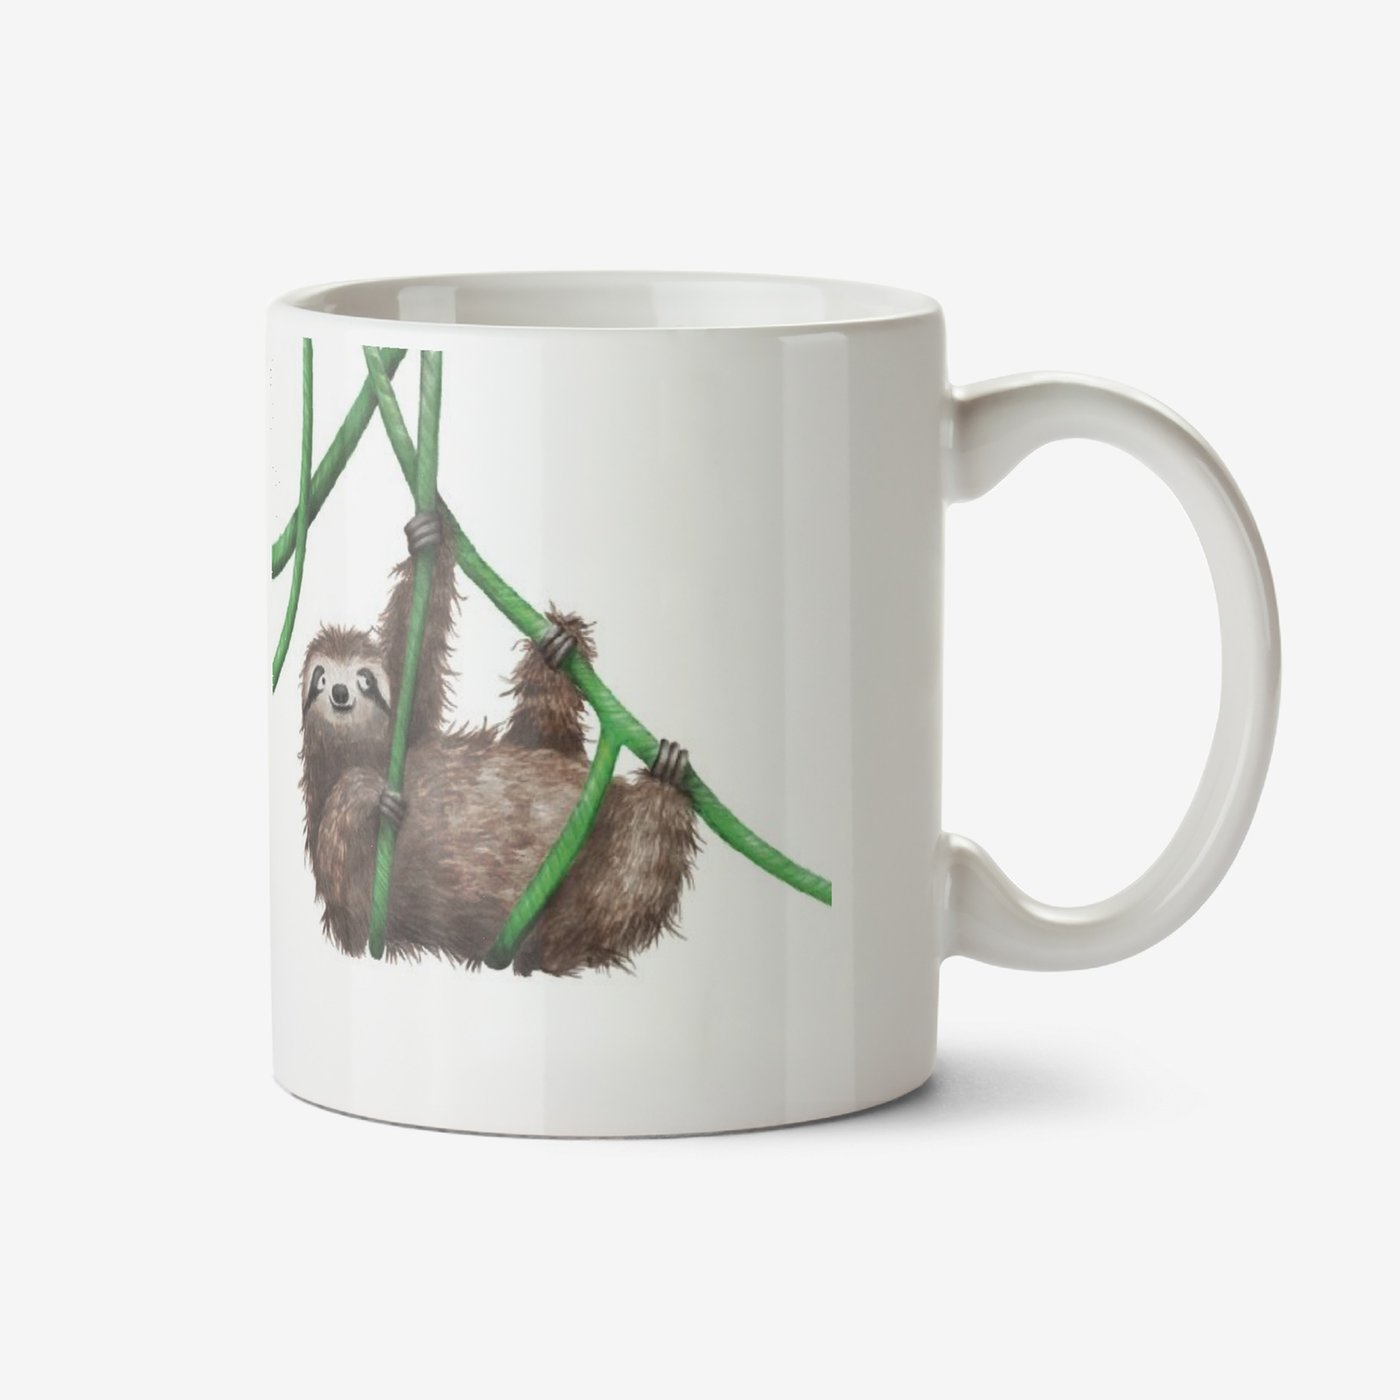 Sloth Says: I Love You Slow Much  Kids Mugs